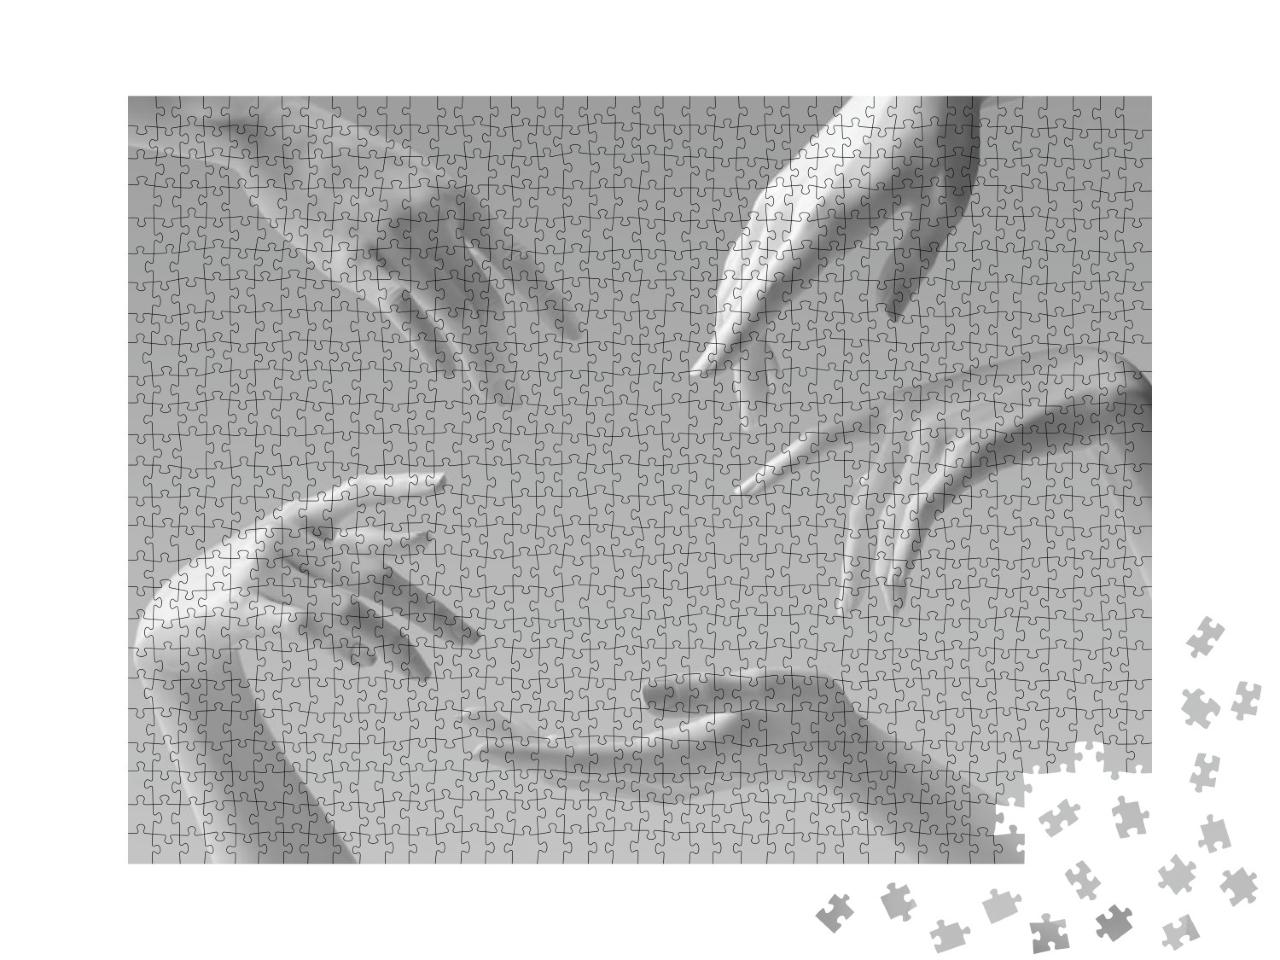 White Woman 3D Hands Showing, Reaching from Above, Pointi... Jigsaw Puzzle with 1000 pieces